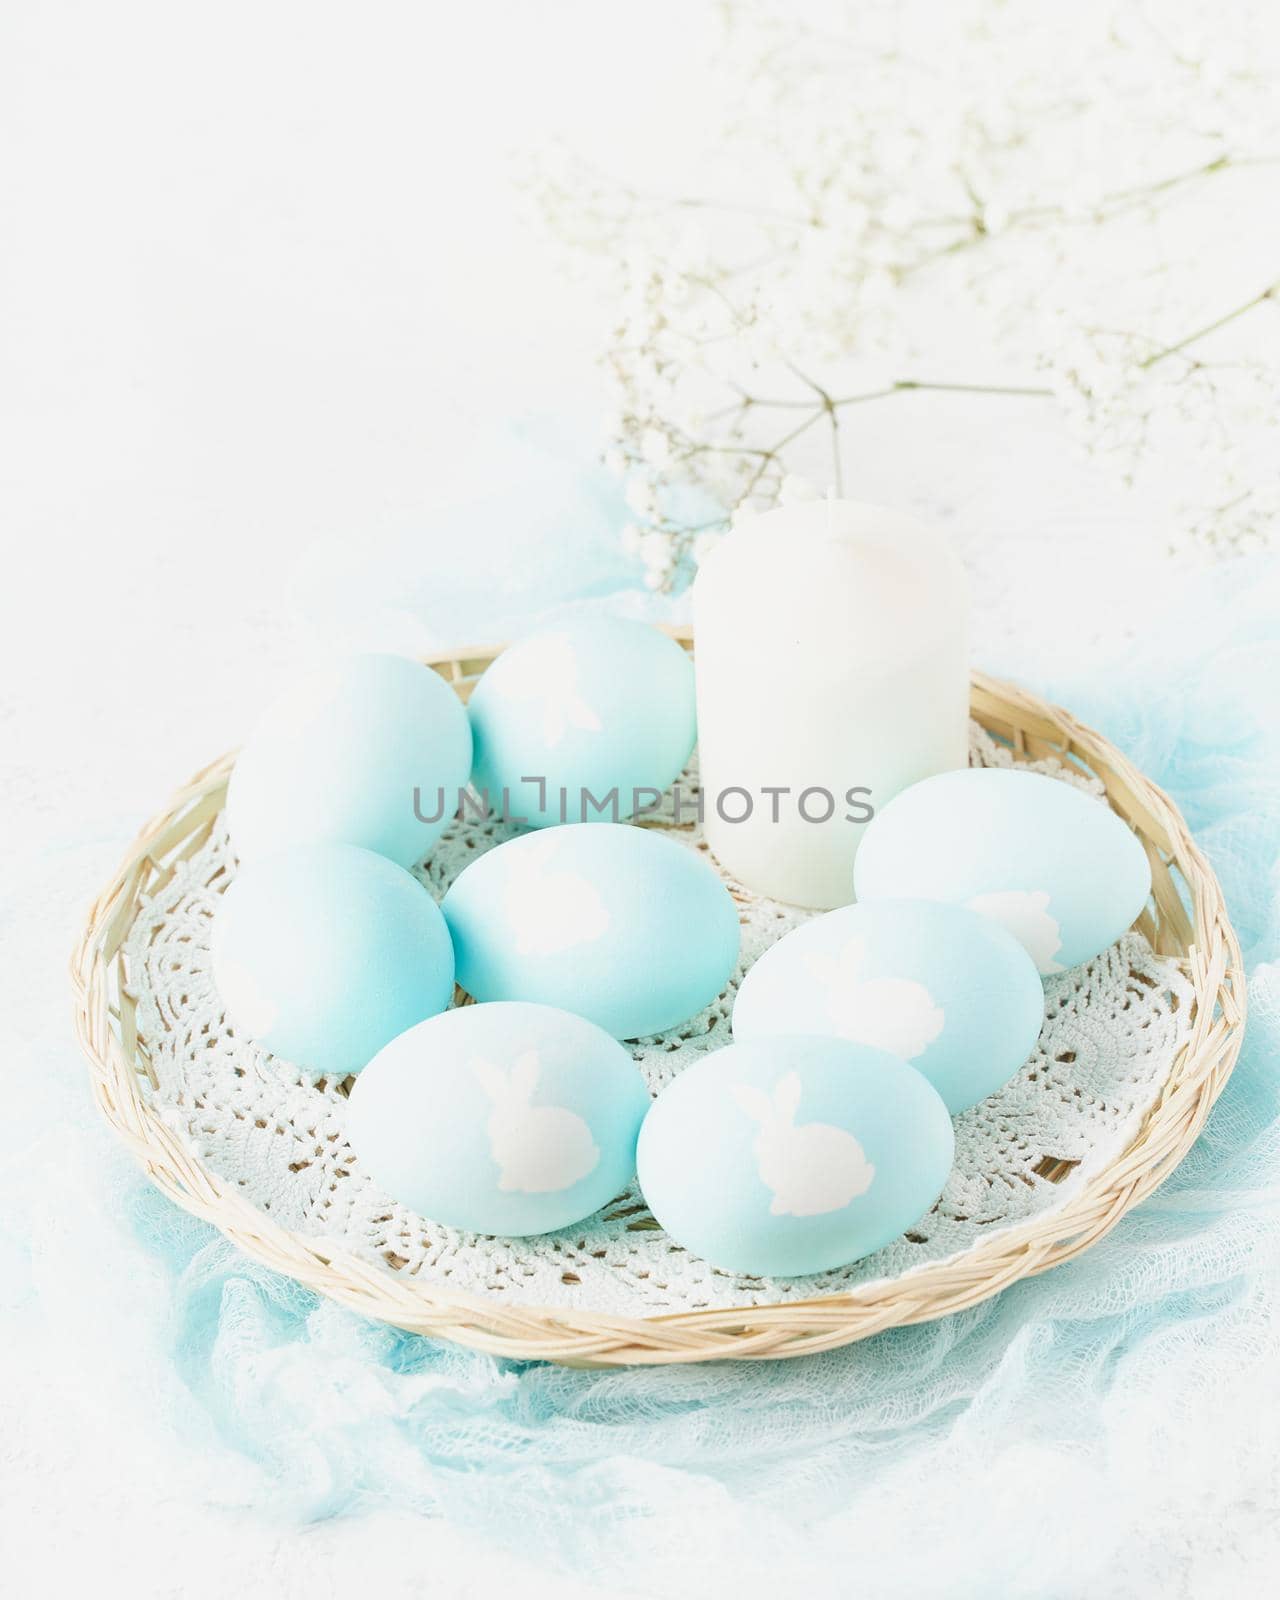 Easter. Holiday. Light white background, gentle pastel colors. Flowers in background, side view by NataBene